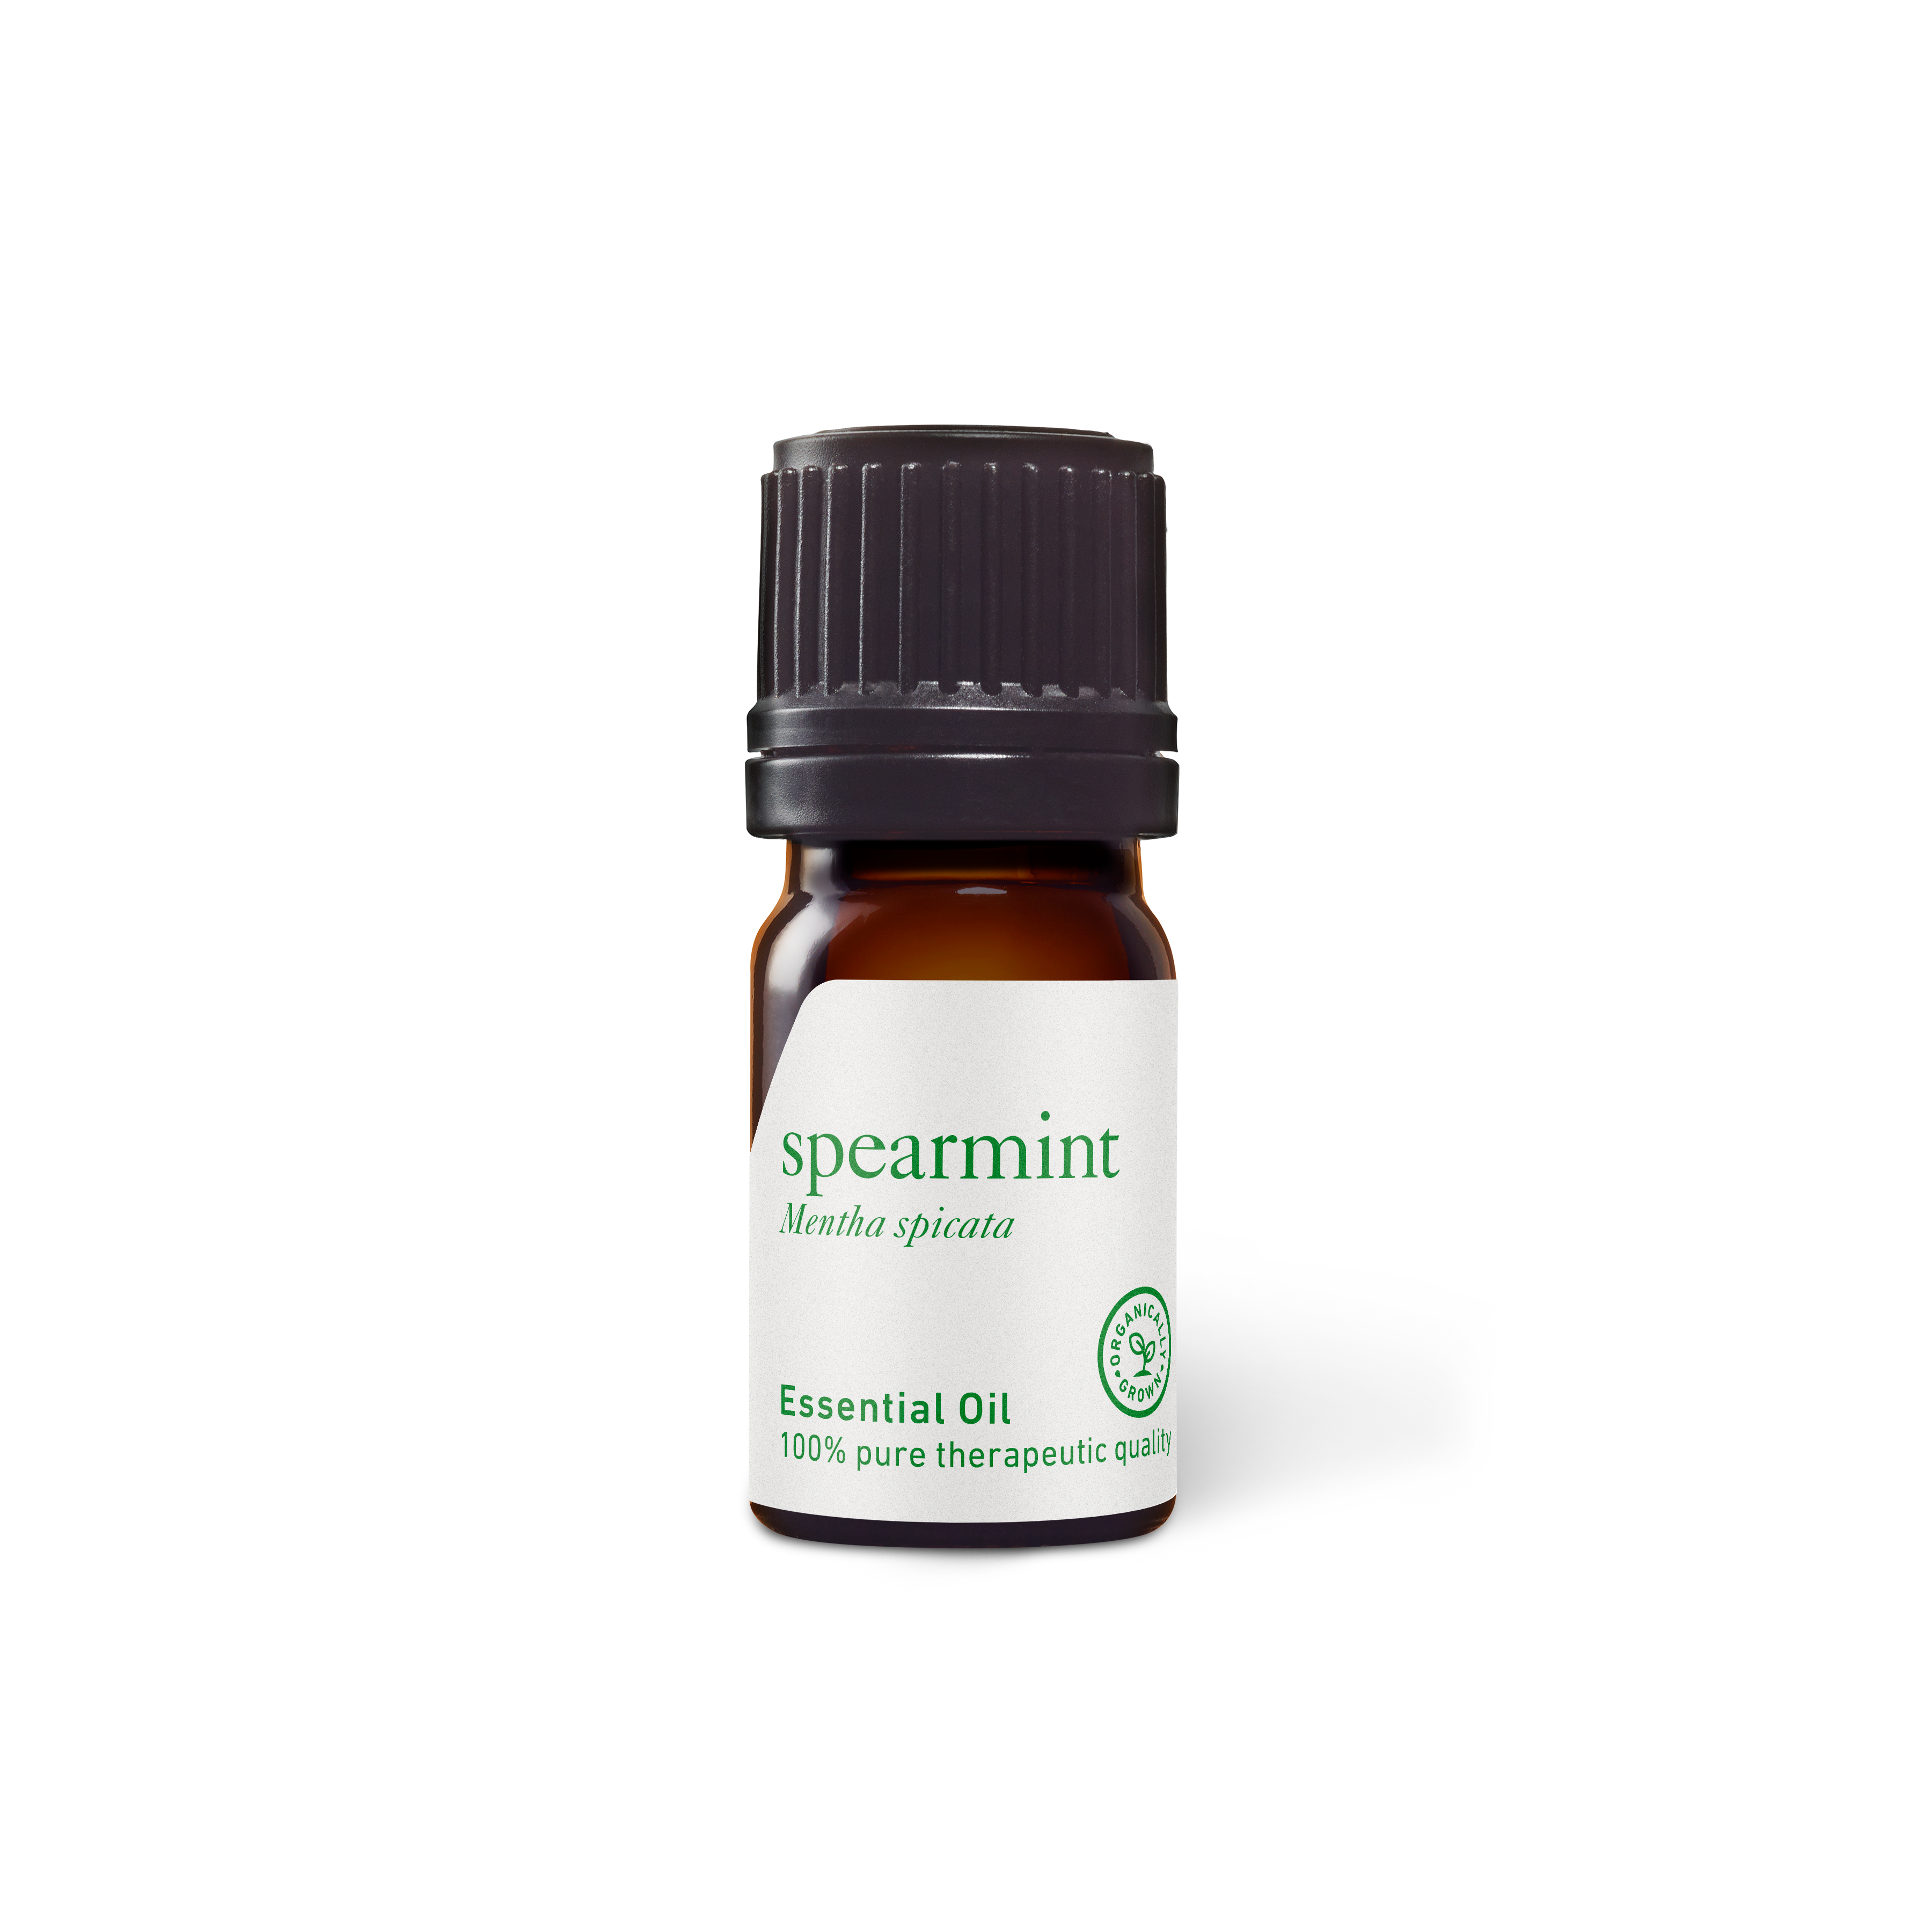 Best Spearmint Oil Indian - Fast Shipping - Norex flavours